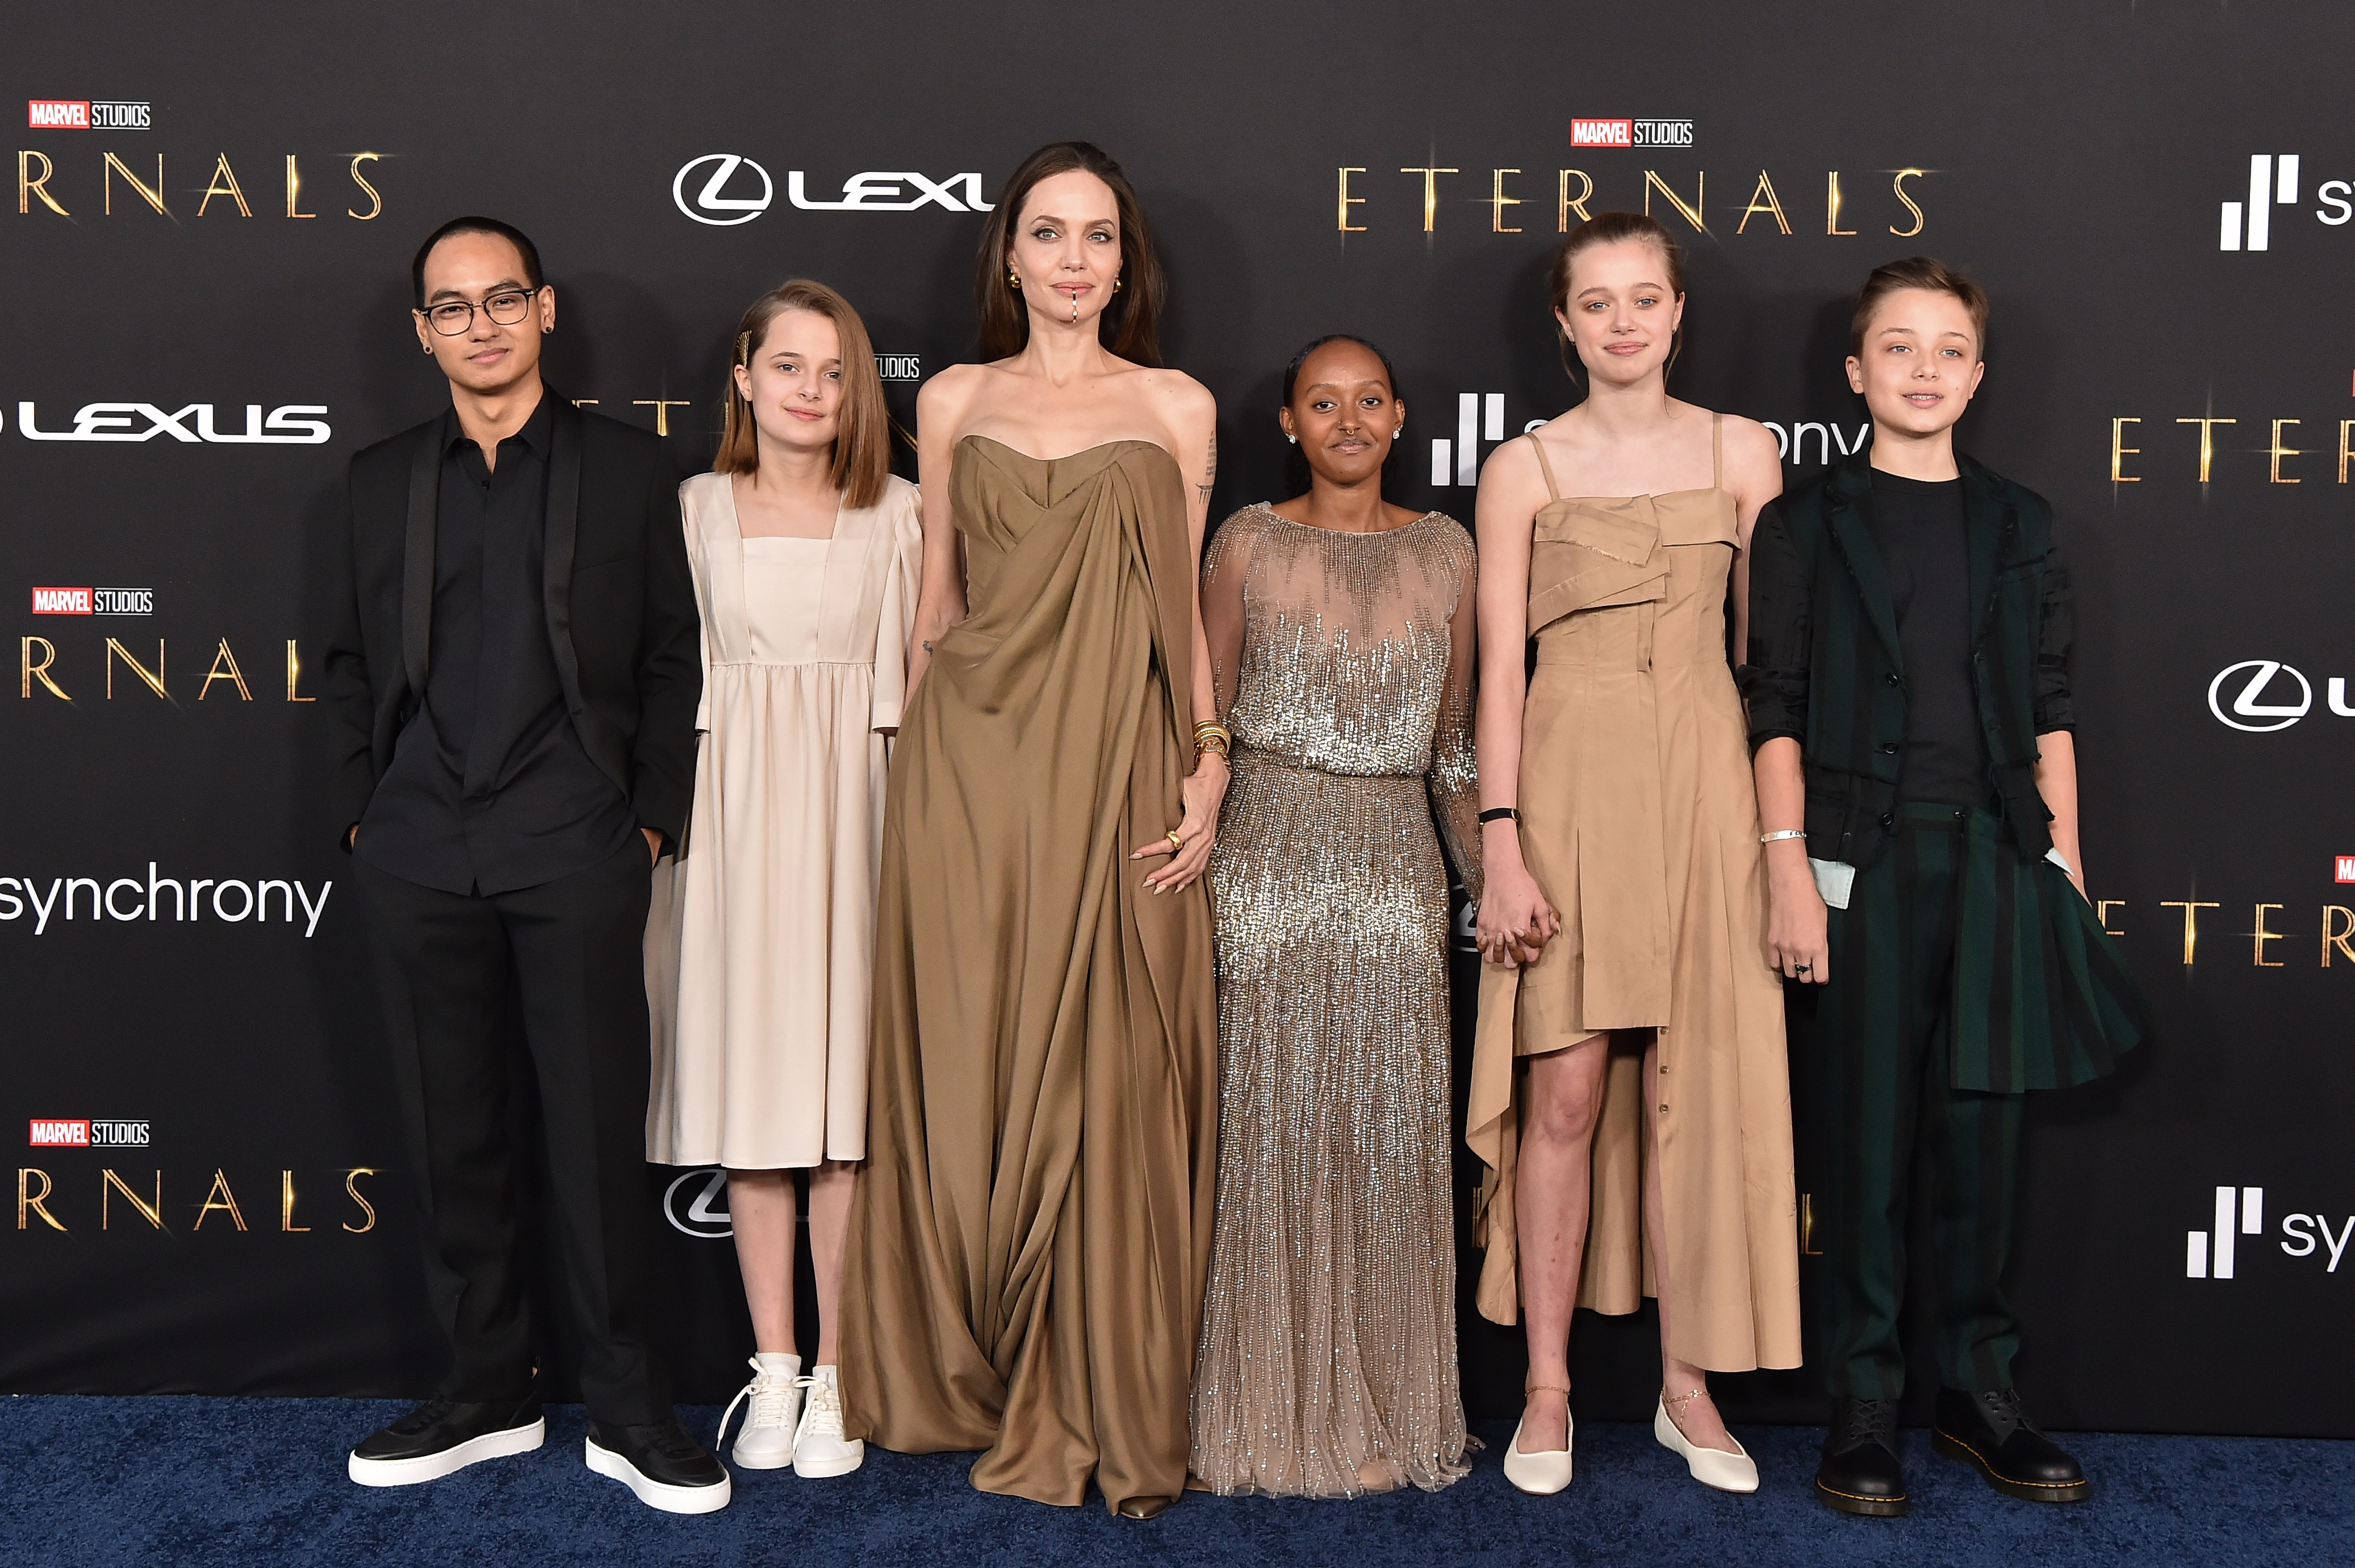 Maddox, Vivienne, Zahara, Shiloh, and Knox Jolie-Pitt with their mother, Angelina Jolie at the LA "Eternals" premiere in October 2021 | Source: Getty Images